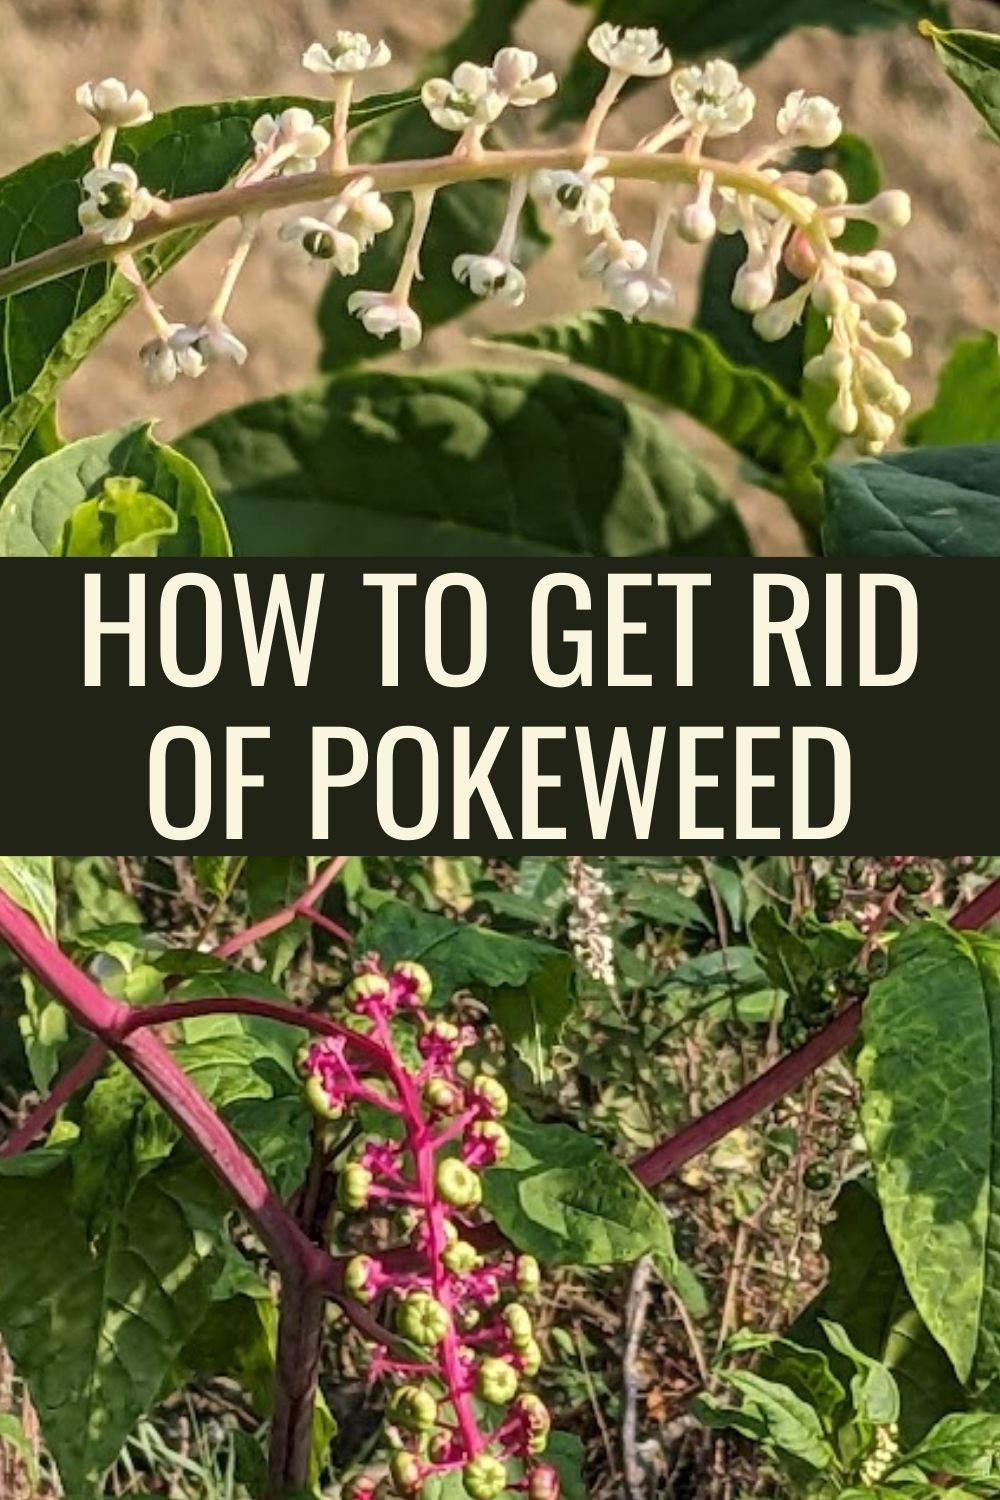 How to Get Rid of Pokeweed.